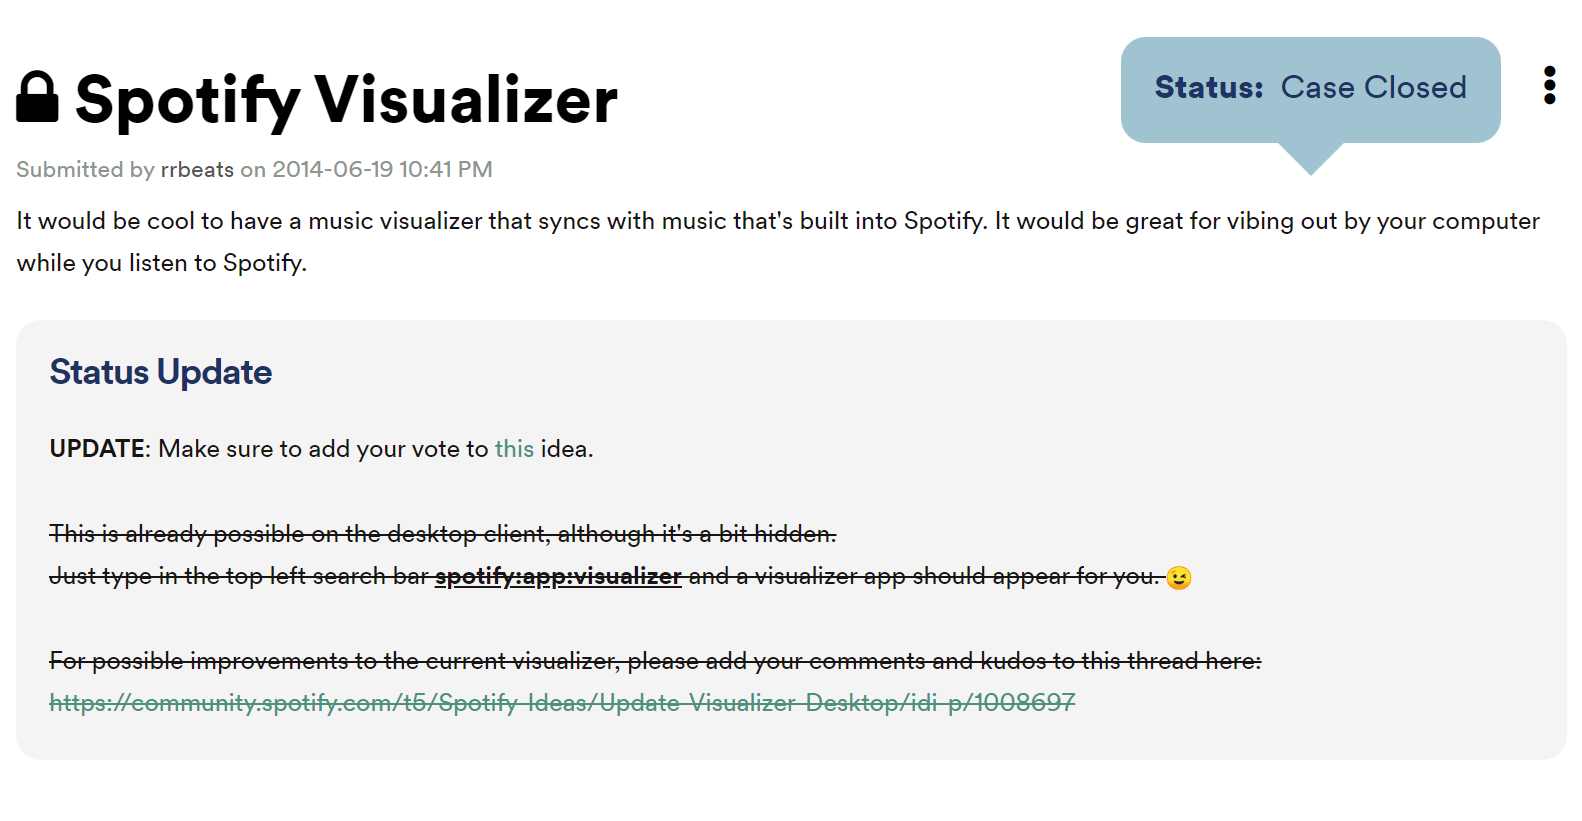 Spotify Visualizer Is Closed